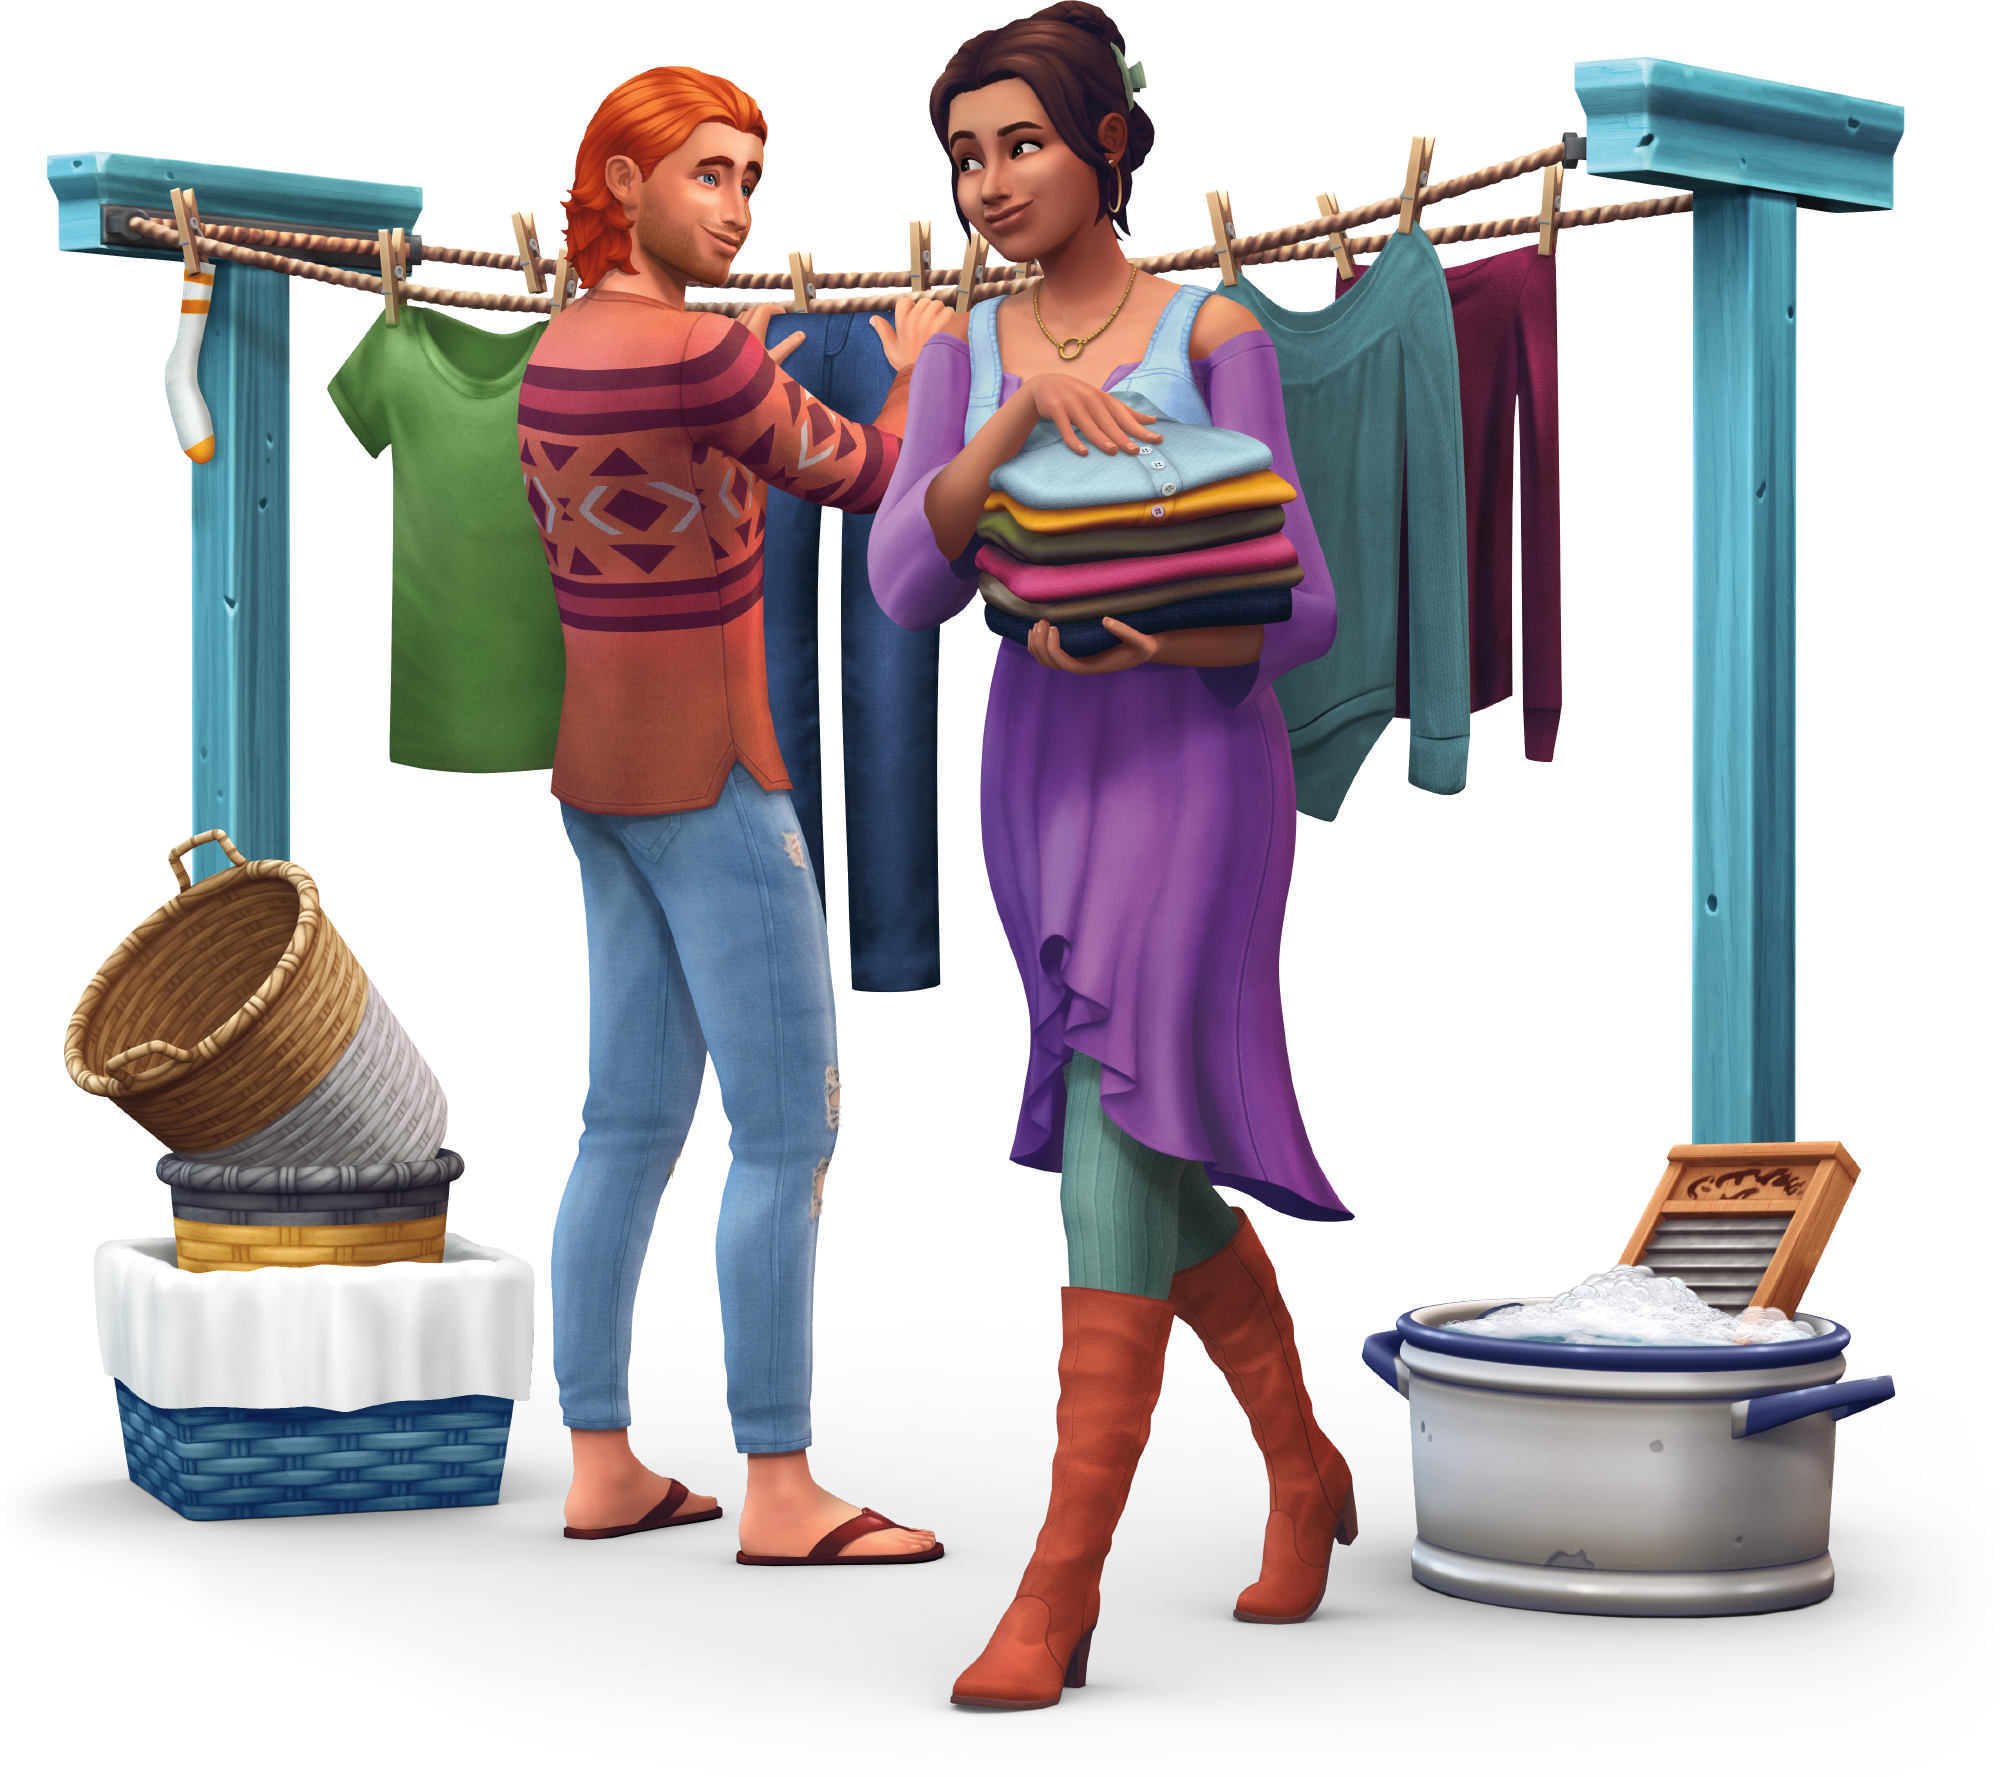 The Sims Characters PNG Transparent Image